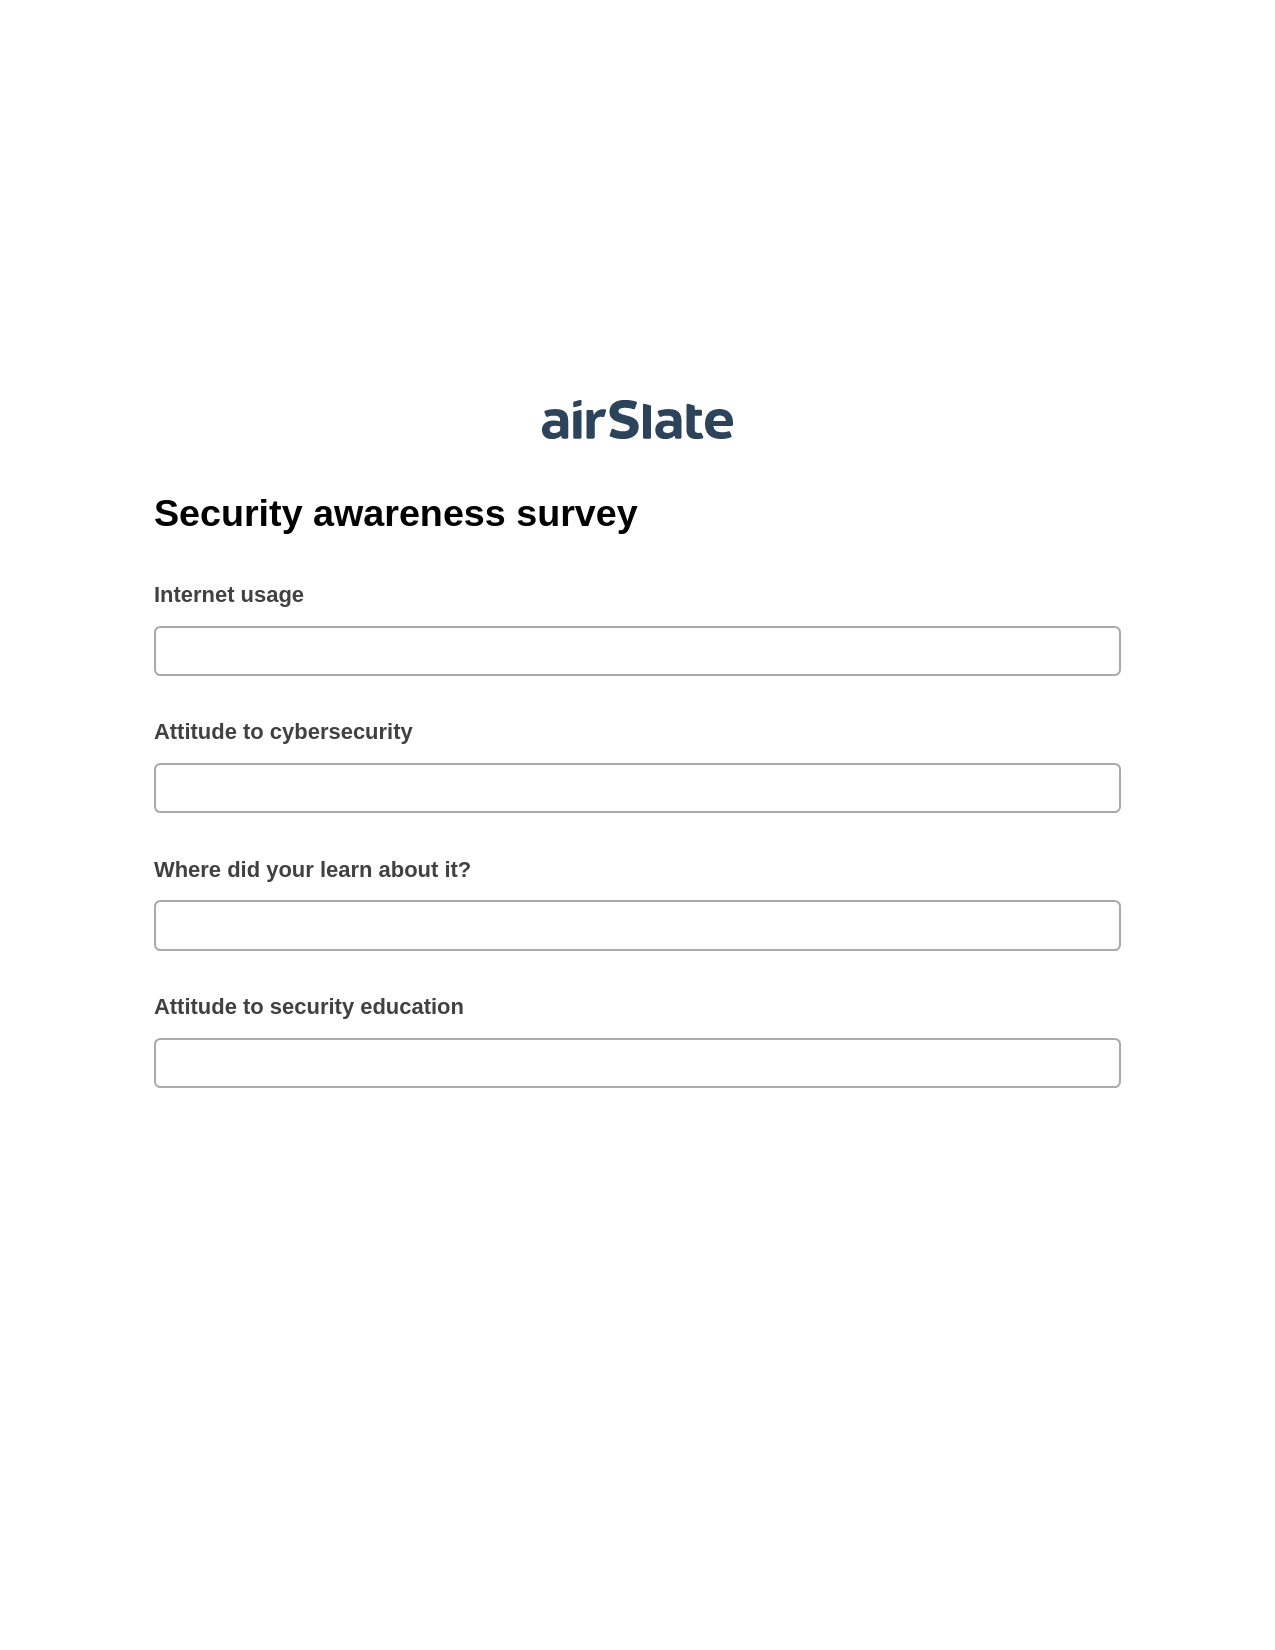 Security awareness survey Pre-fill from Google Sheet Dropdown Options Bot, Jira Bot, Export to NetSuite Record Bot